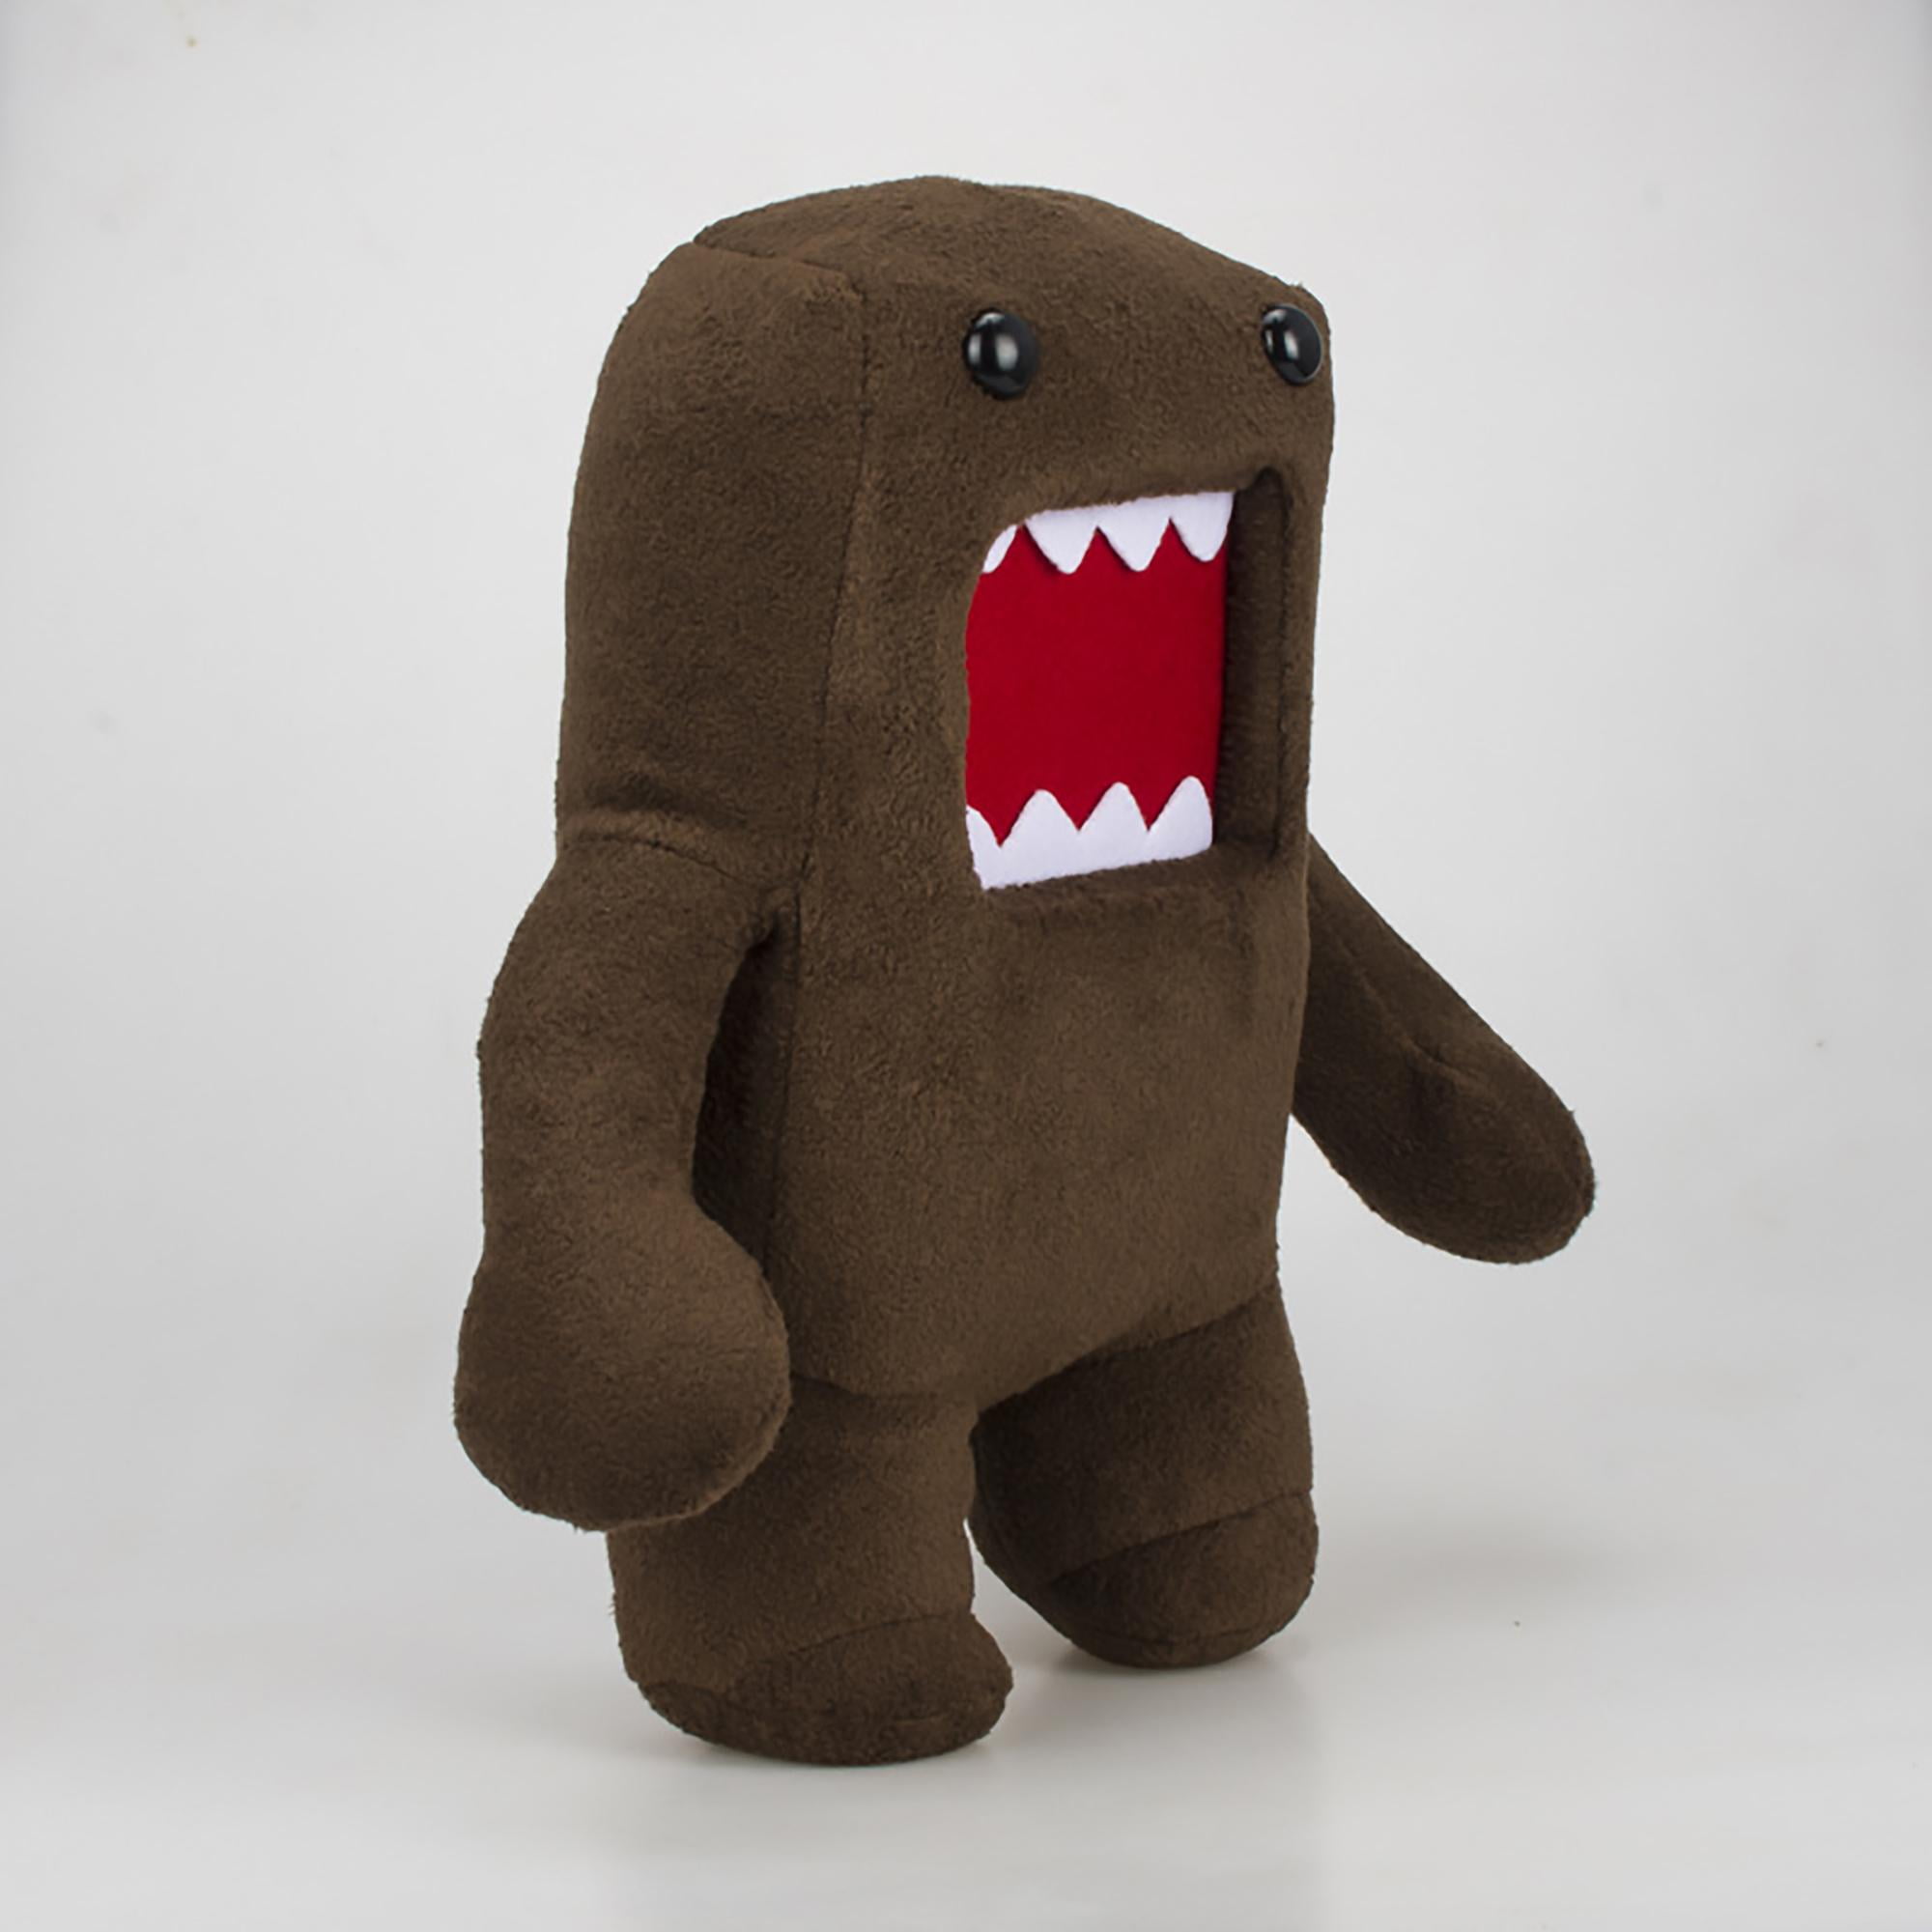 Fast Delivery! DOMO KUN Plush Toy Cute Soft Toy Stuffed Toy Doll Kids Gift 8" 